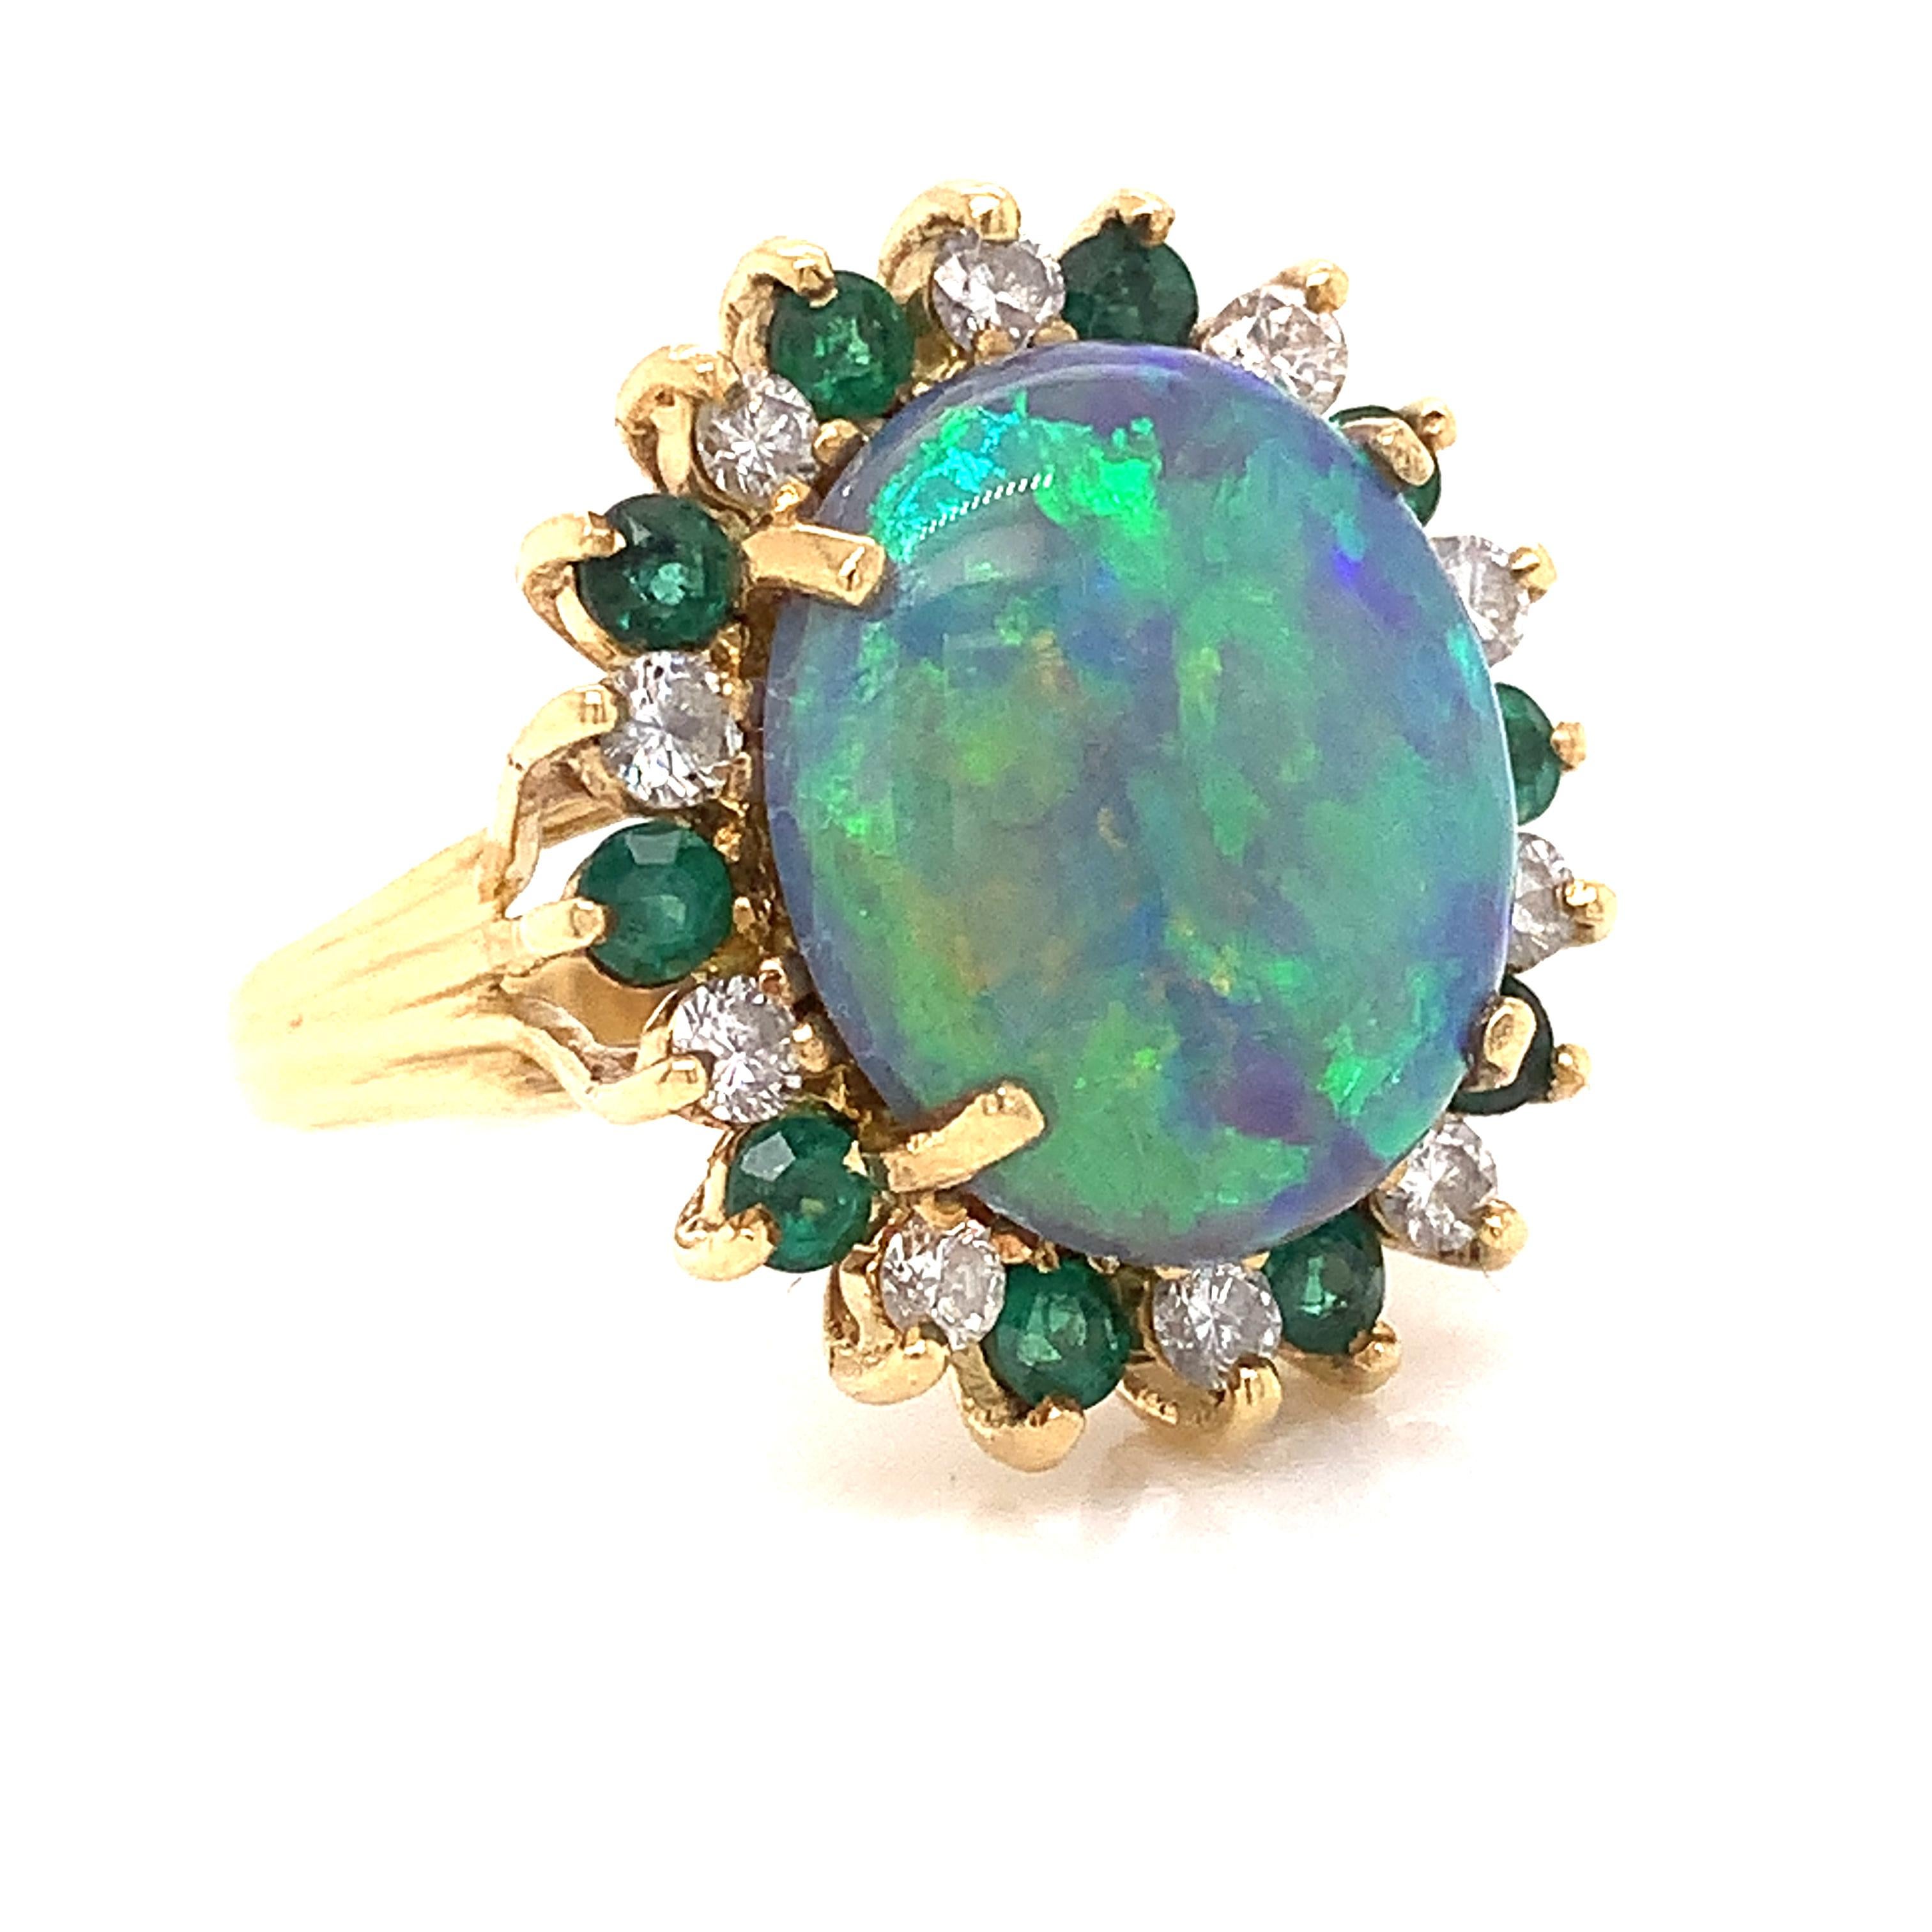 This stunning dark blue and green Black Opal is 4.71 carats.  It is surrounded by ten SI clarity, G-H color round diamonds, one cttw.  Also surrounded by ten round emeralds equal to one cttw.  This ring is set in four grams of 18 Kt yellow gold.  